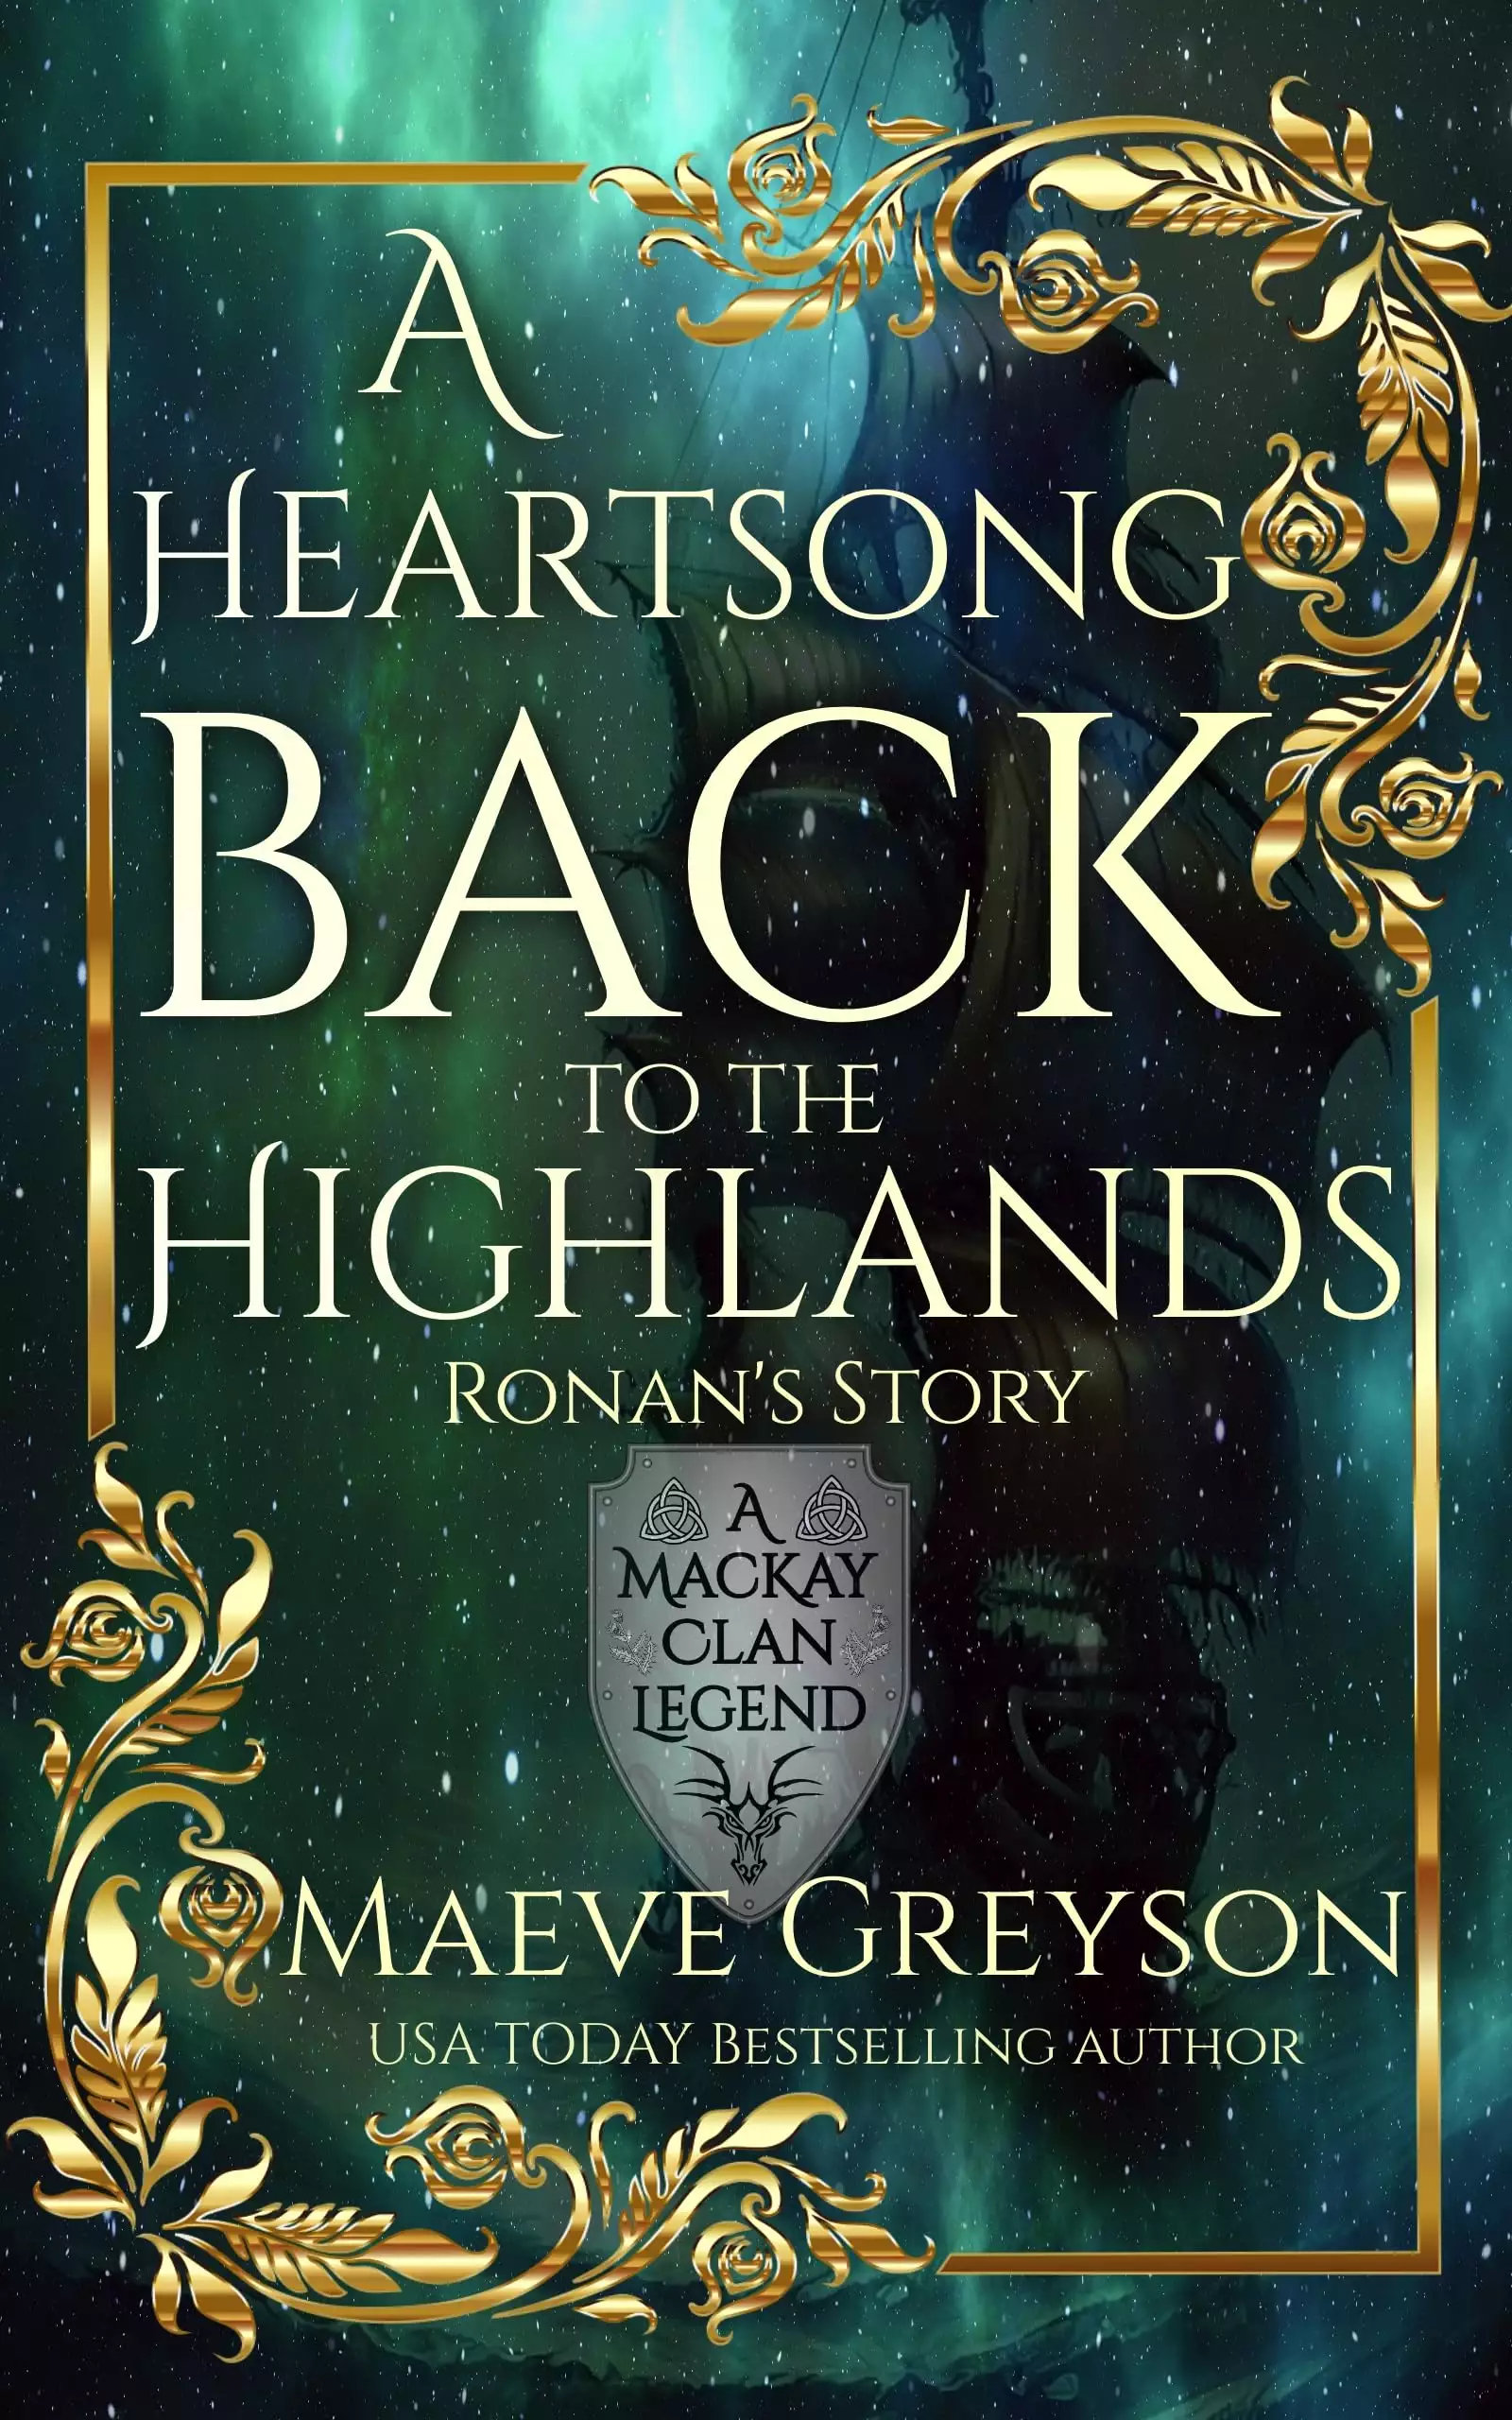 A Heartsong Back to the Highlands - Ronan’s Story - (A MacKay Clan Legend) - A Scottish Fantasy Romance